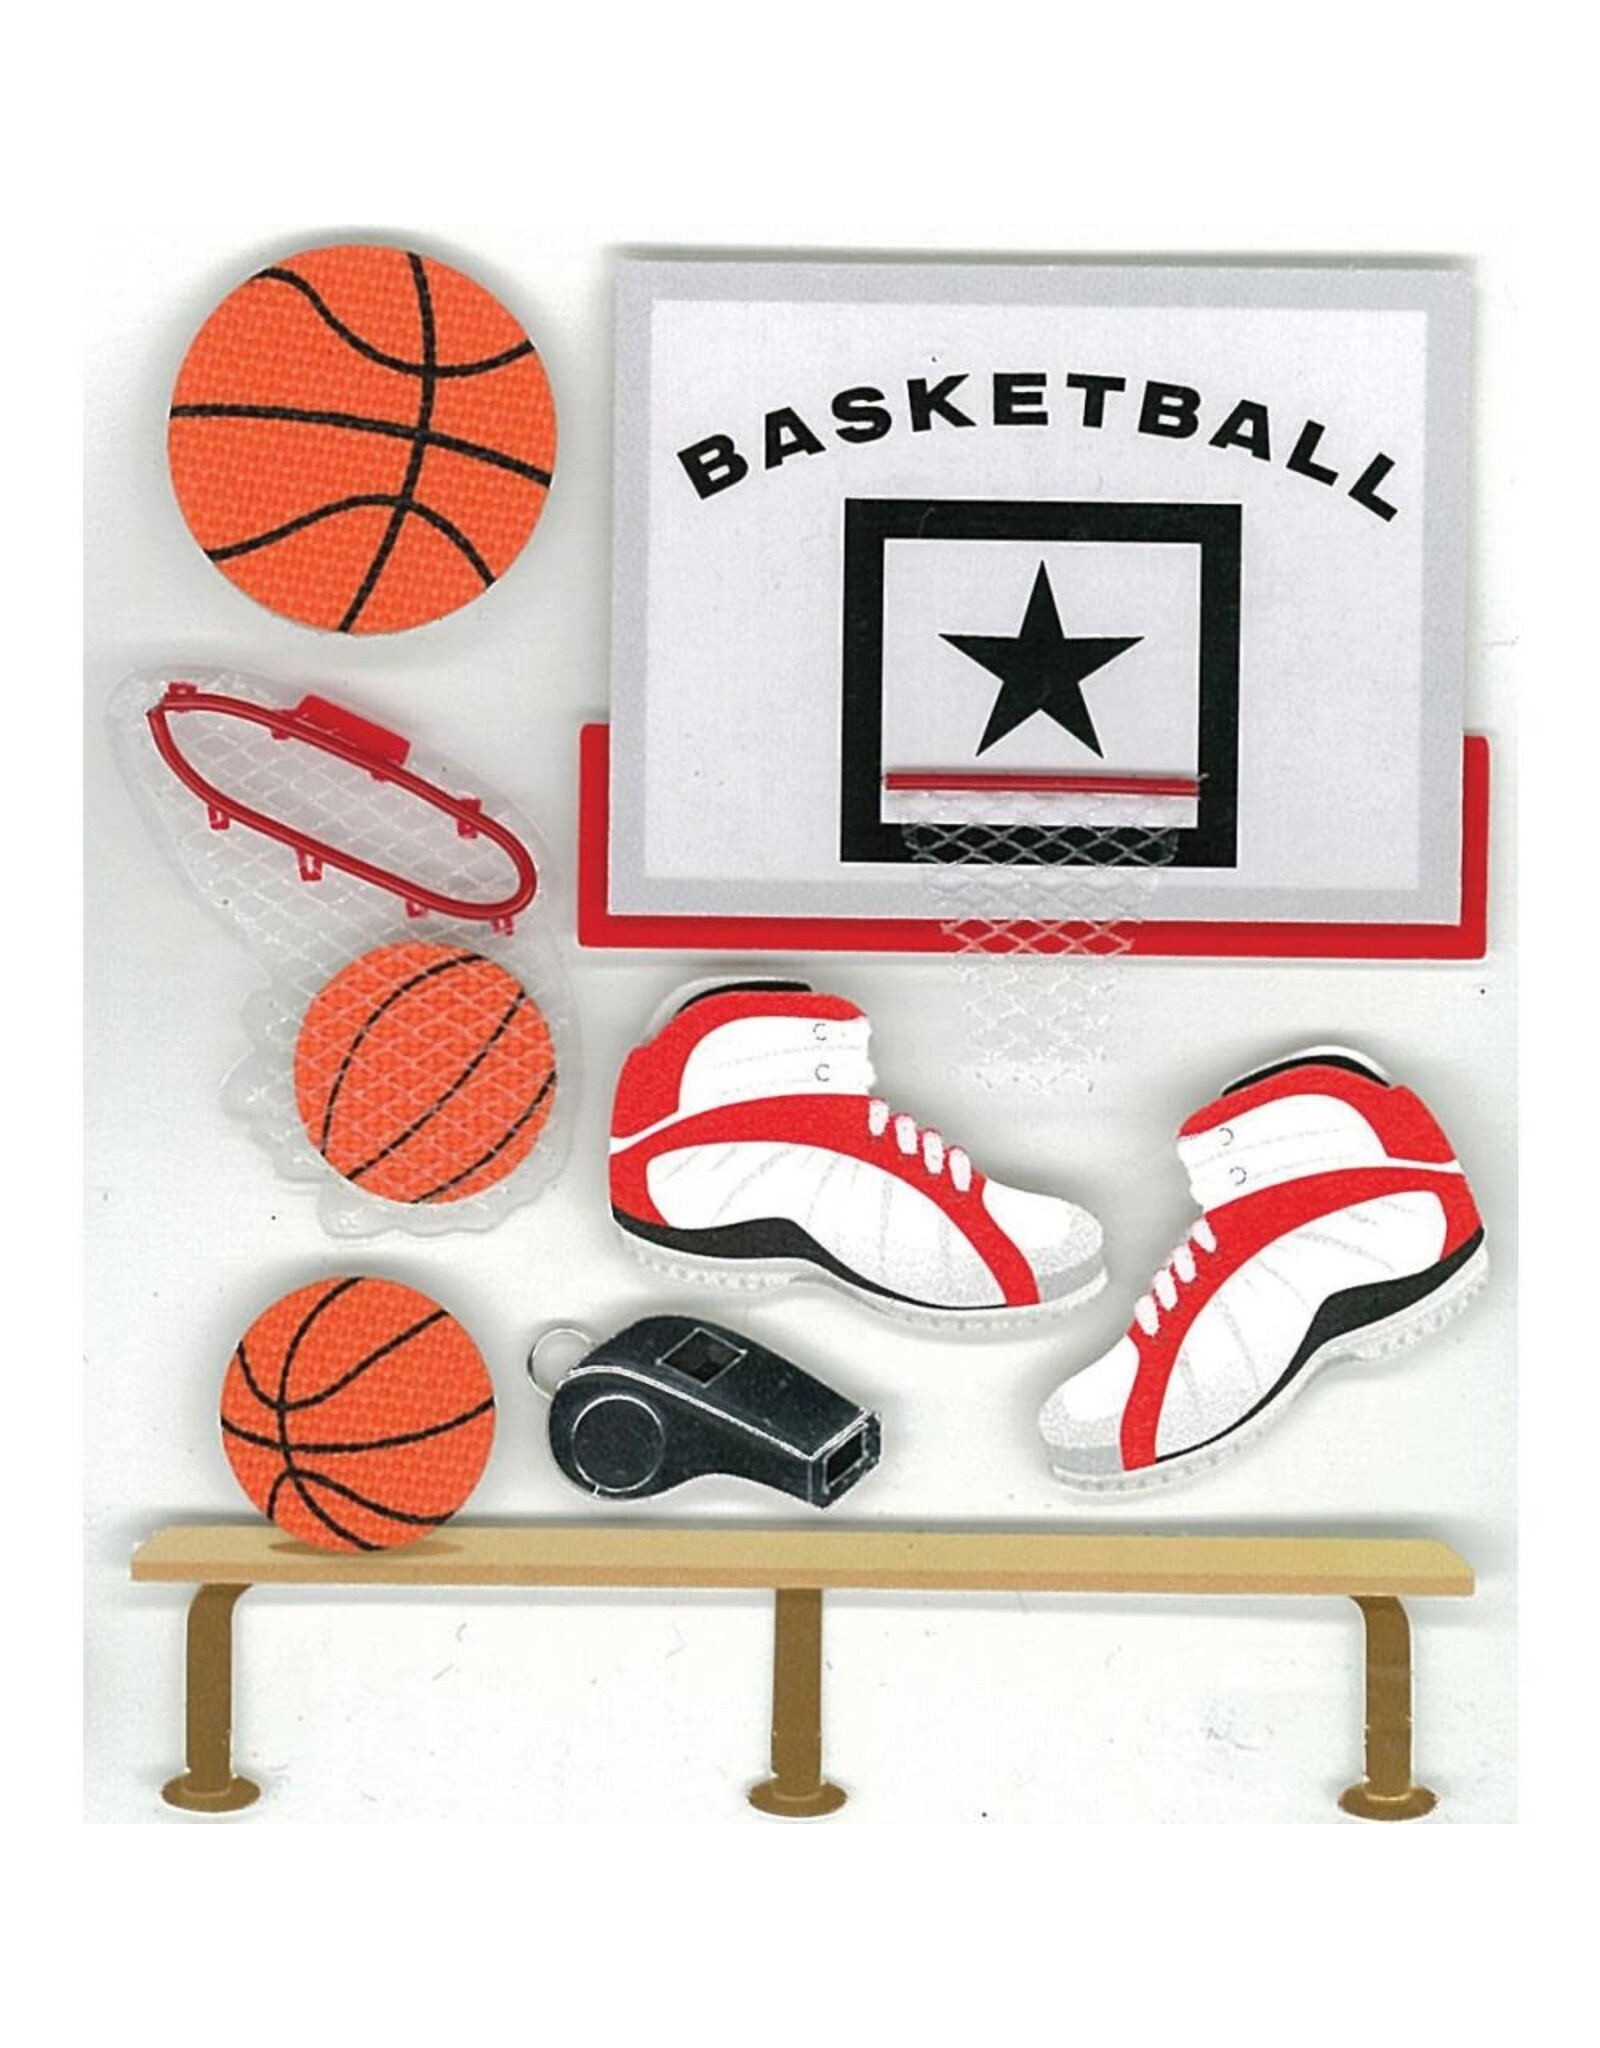 JOLEE’S JOLEE'S BOUTIQUE BASKETBALL DIMENSIONAL STICKERS